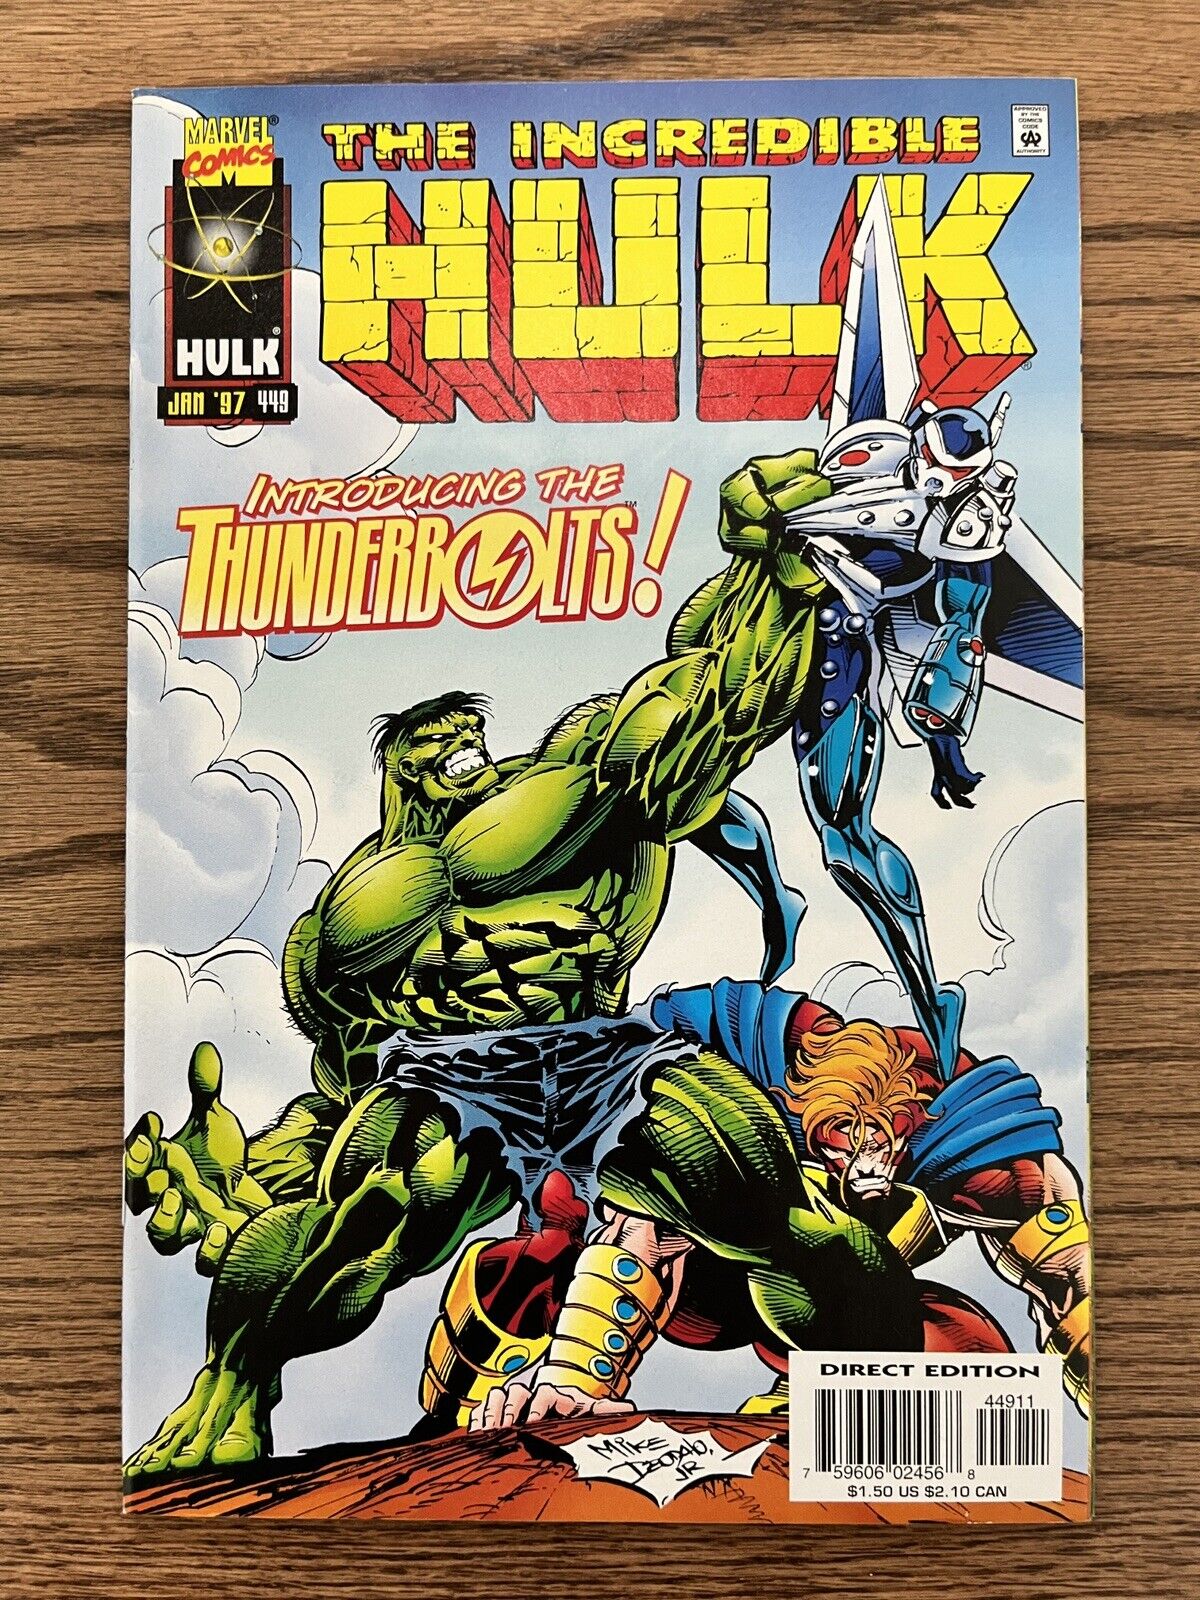 INCREDIBLE HULK #449 1ST APPEARANCE Of THE THUNDERBOLTS 1997 Marvel